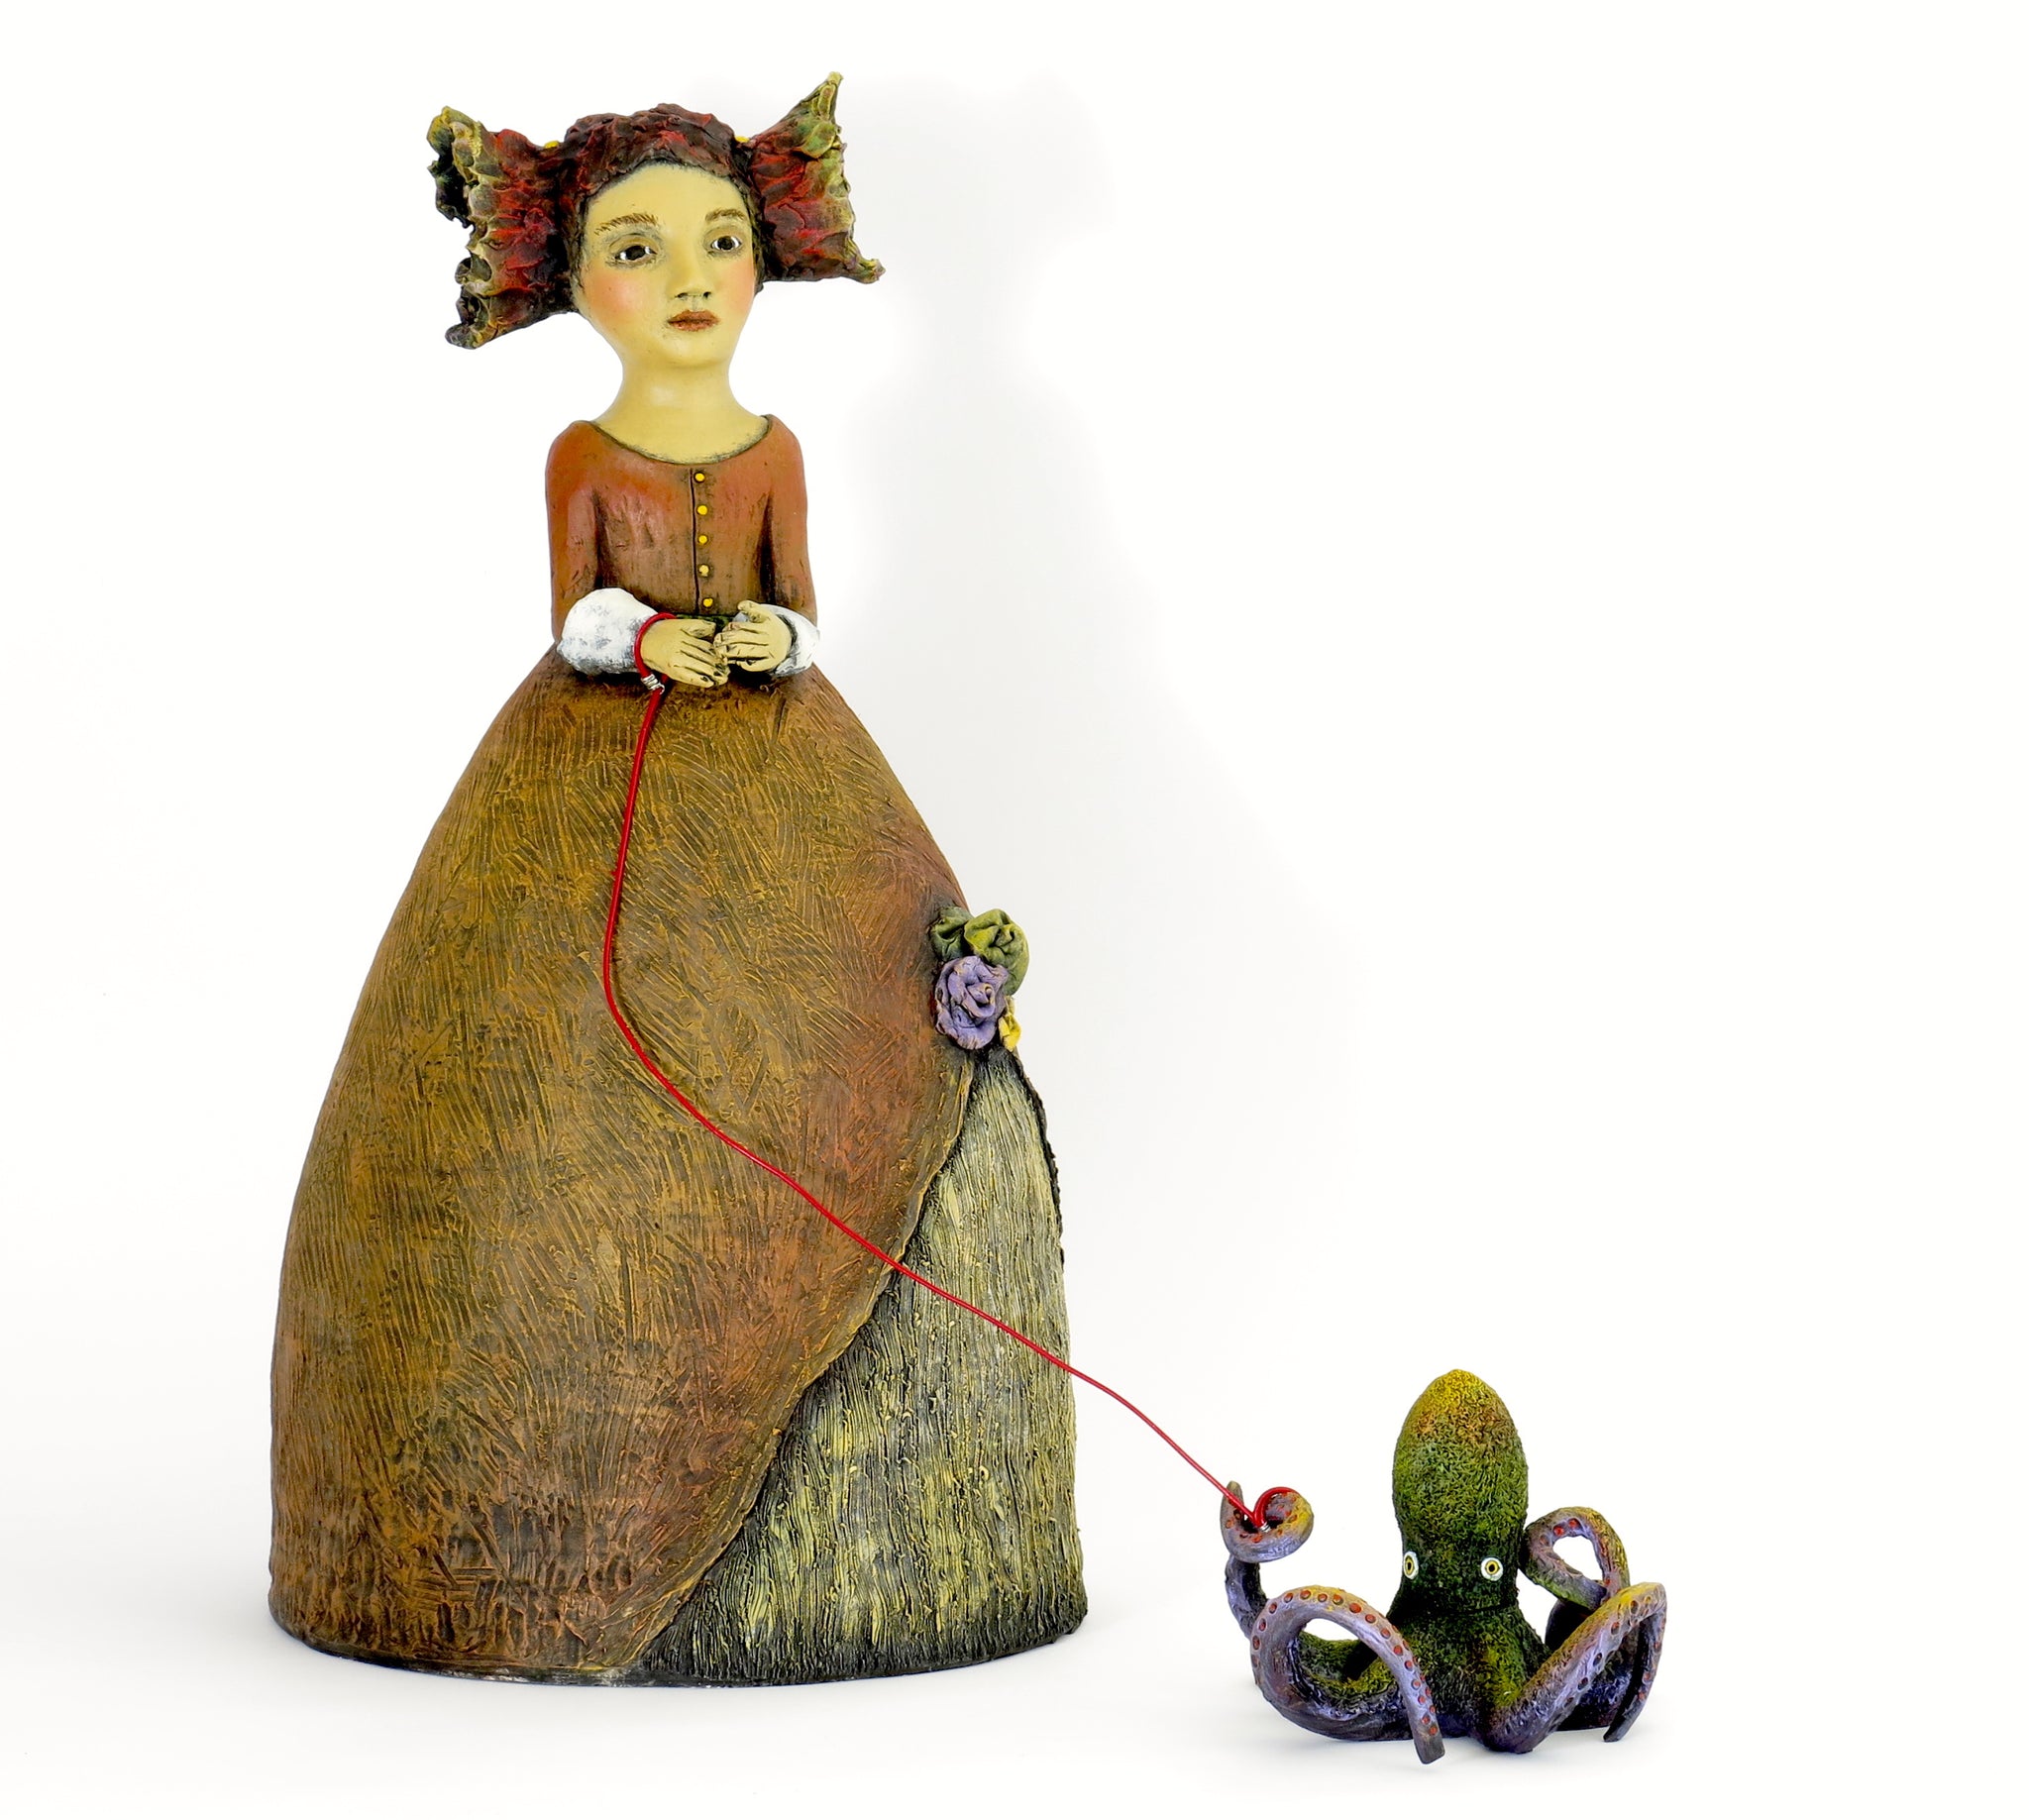 SOLD  "Stella Took Every Opportunity to Flaunt Her Idiosyncrasies" Original ceramic sculpture by Jacquline Hurlbert